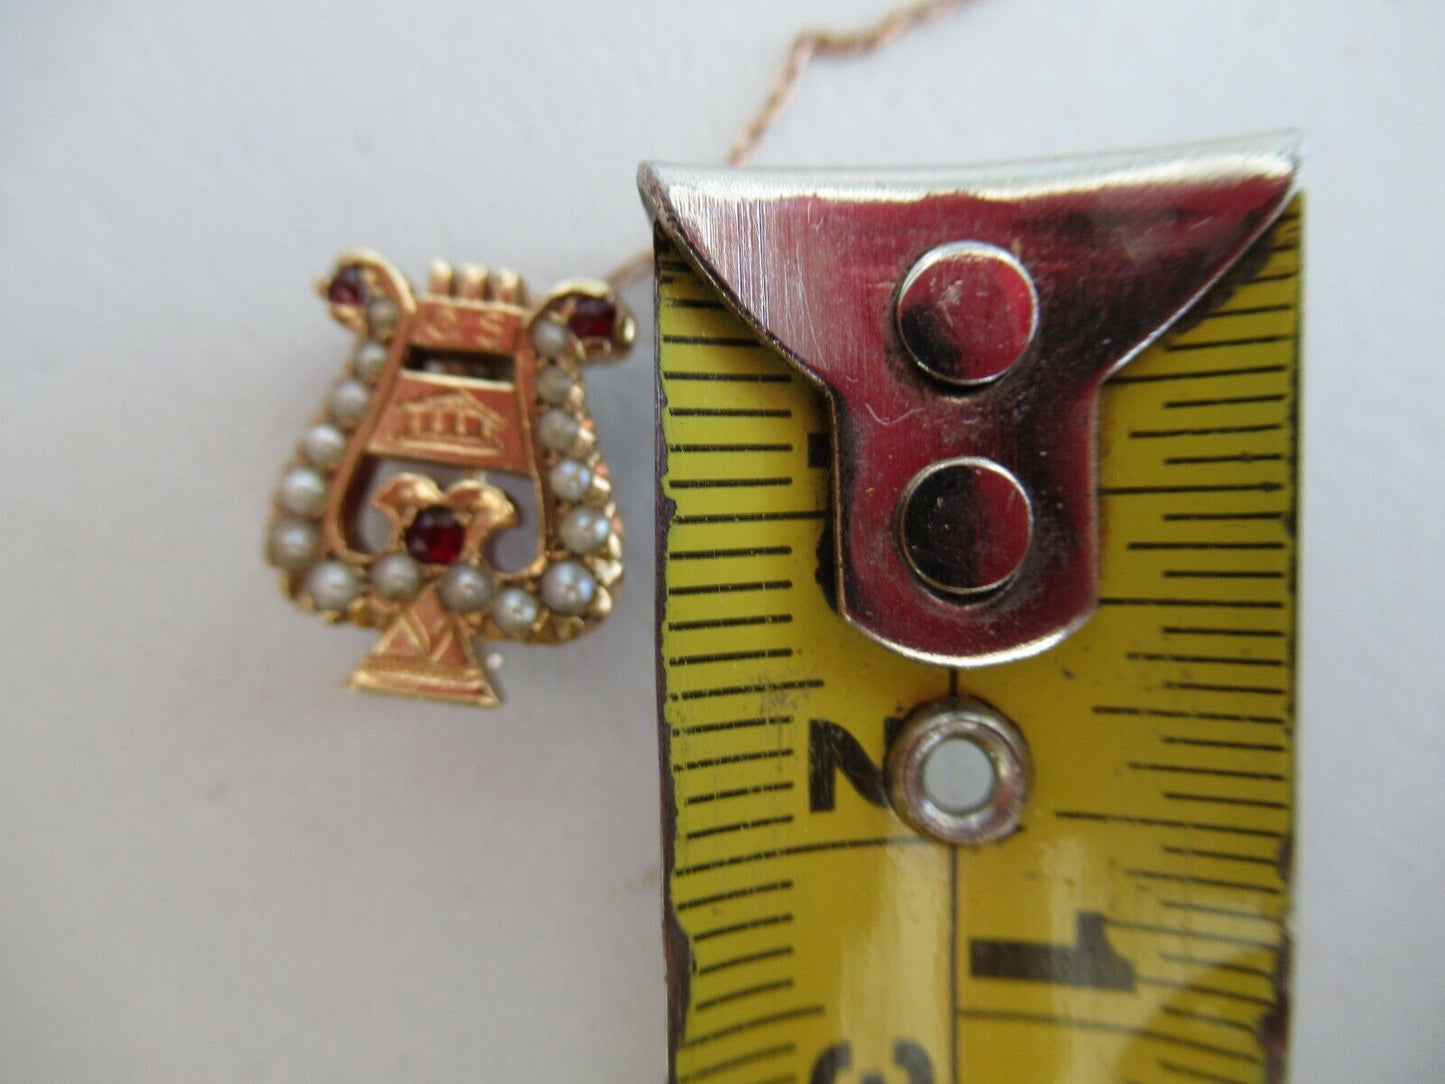 USA FRATERNITY SWEETHEART PIN. MADE IN GOLD. RUBIES. 1926. NAMED. 1656